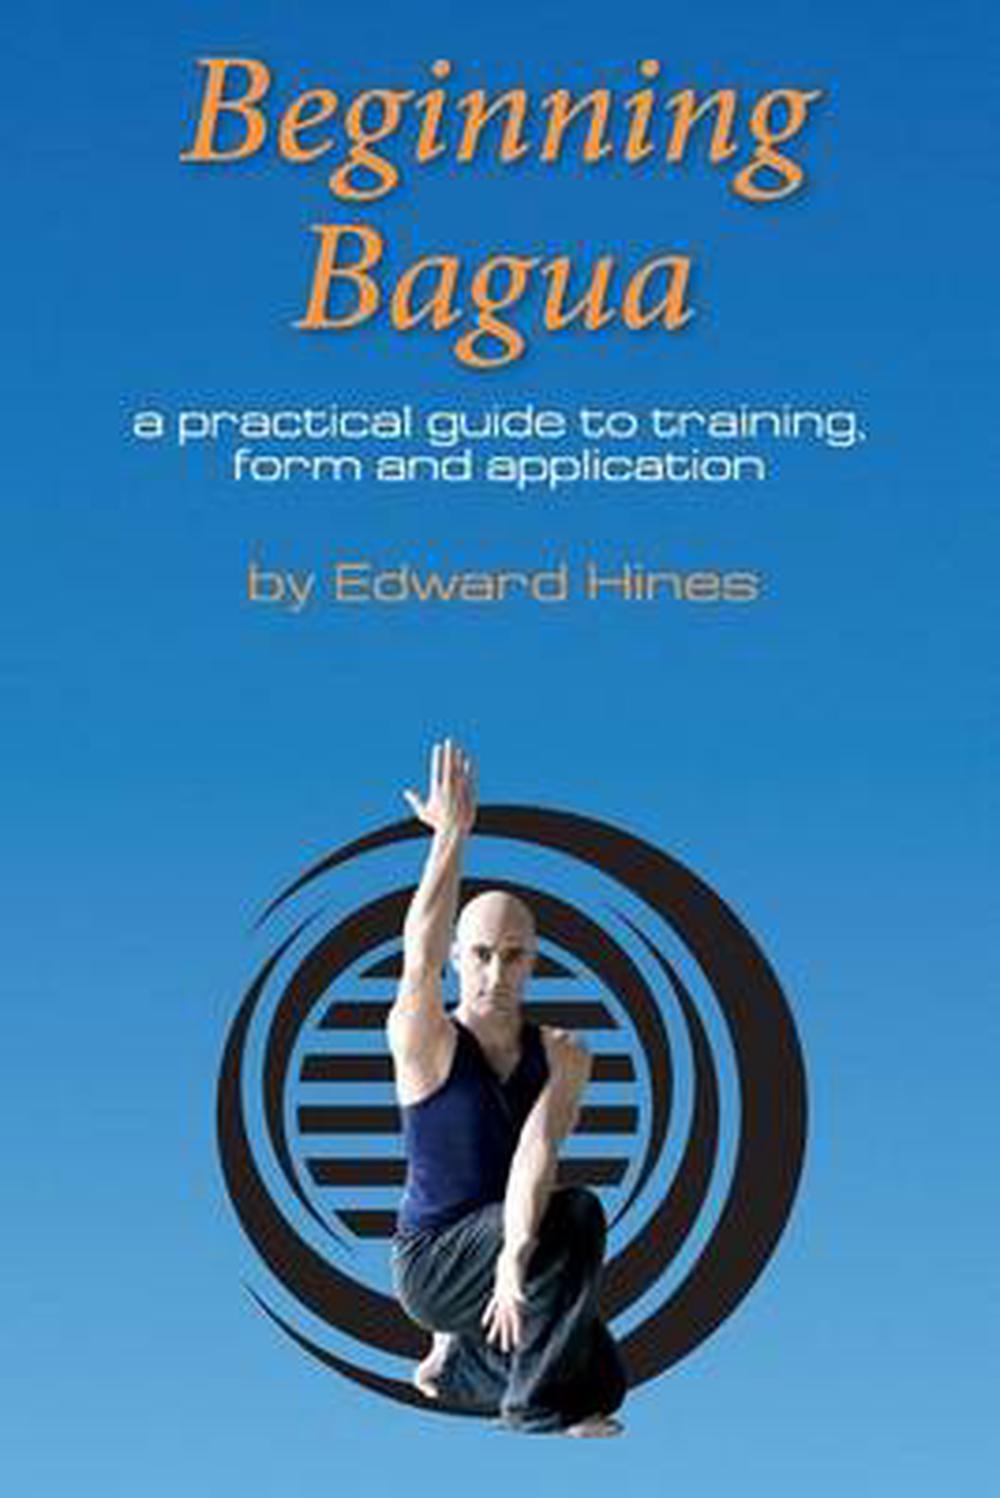 Beginning Bagua A Practical Guide to Training, Form and Application by